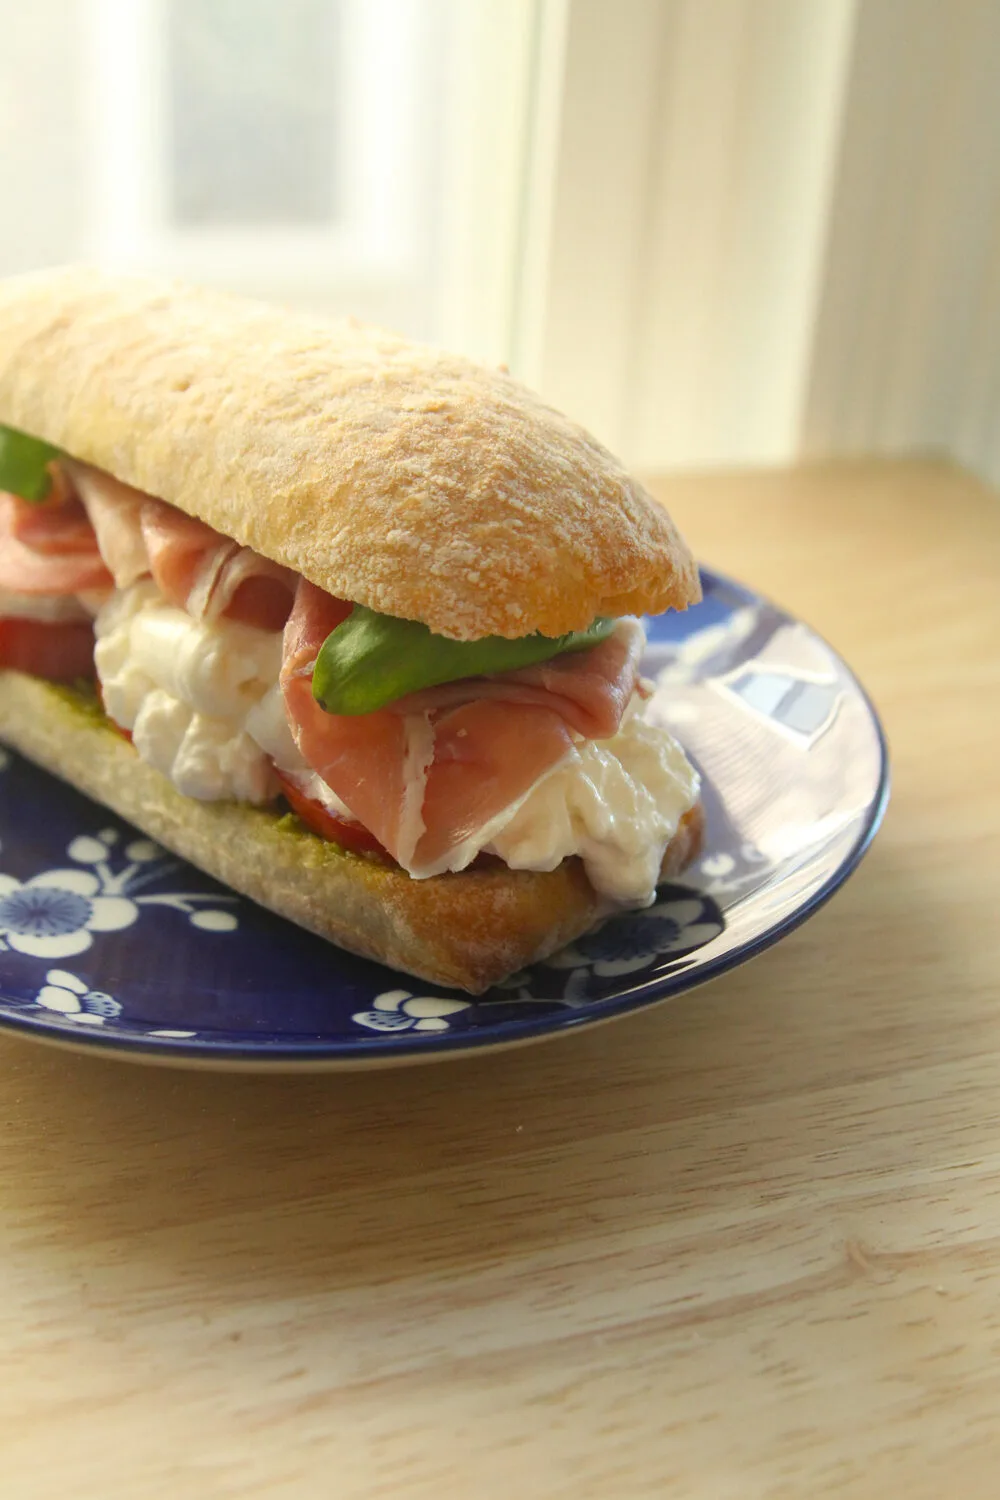 A sandwich on tan ciabatta bread is shown on a blue and white plate sitting on a wooden countertop. It has red tomatoes, white burrata cheese, pink prosciutto and green basil visible.